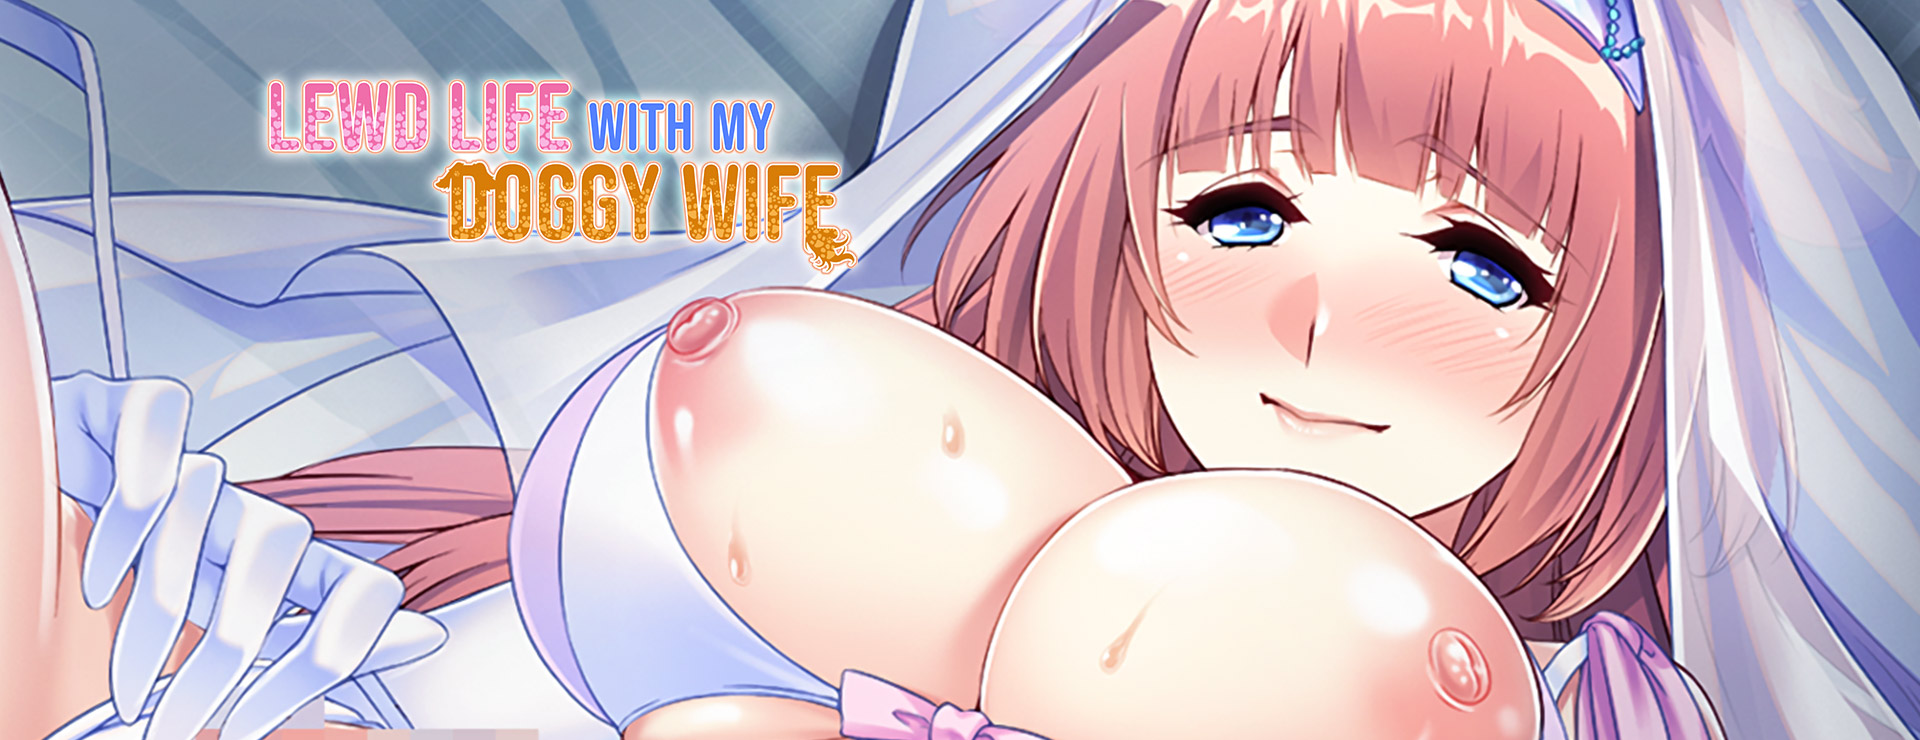 Lewd Life with my Doggy Wife! - 虚拟小说 遊戲